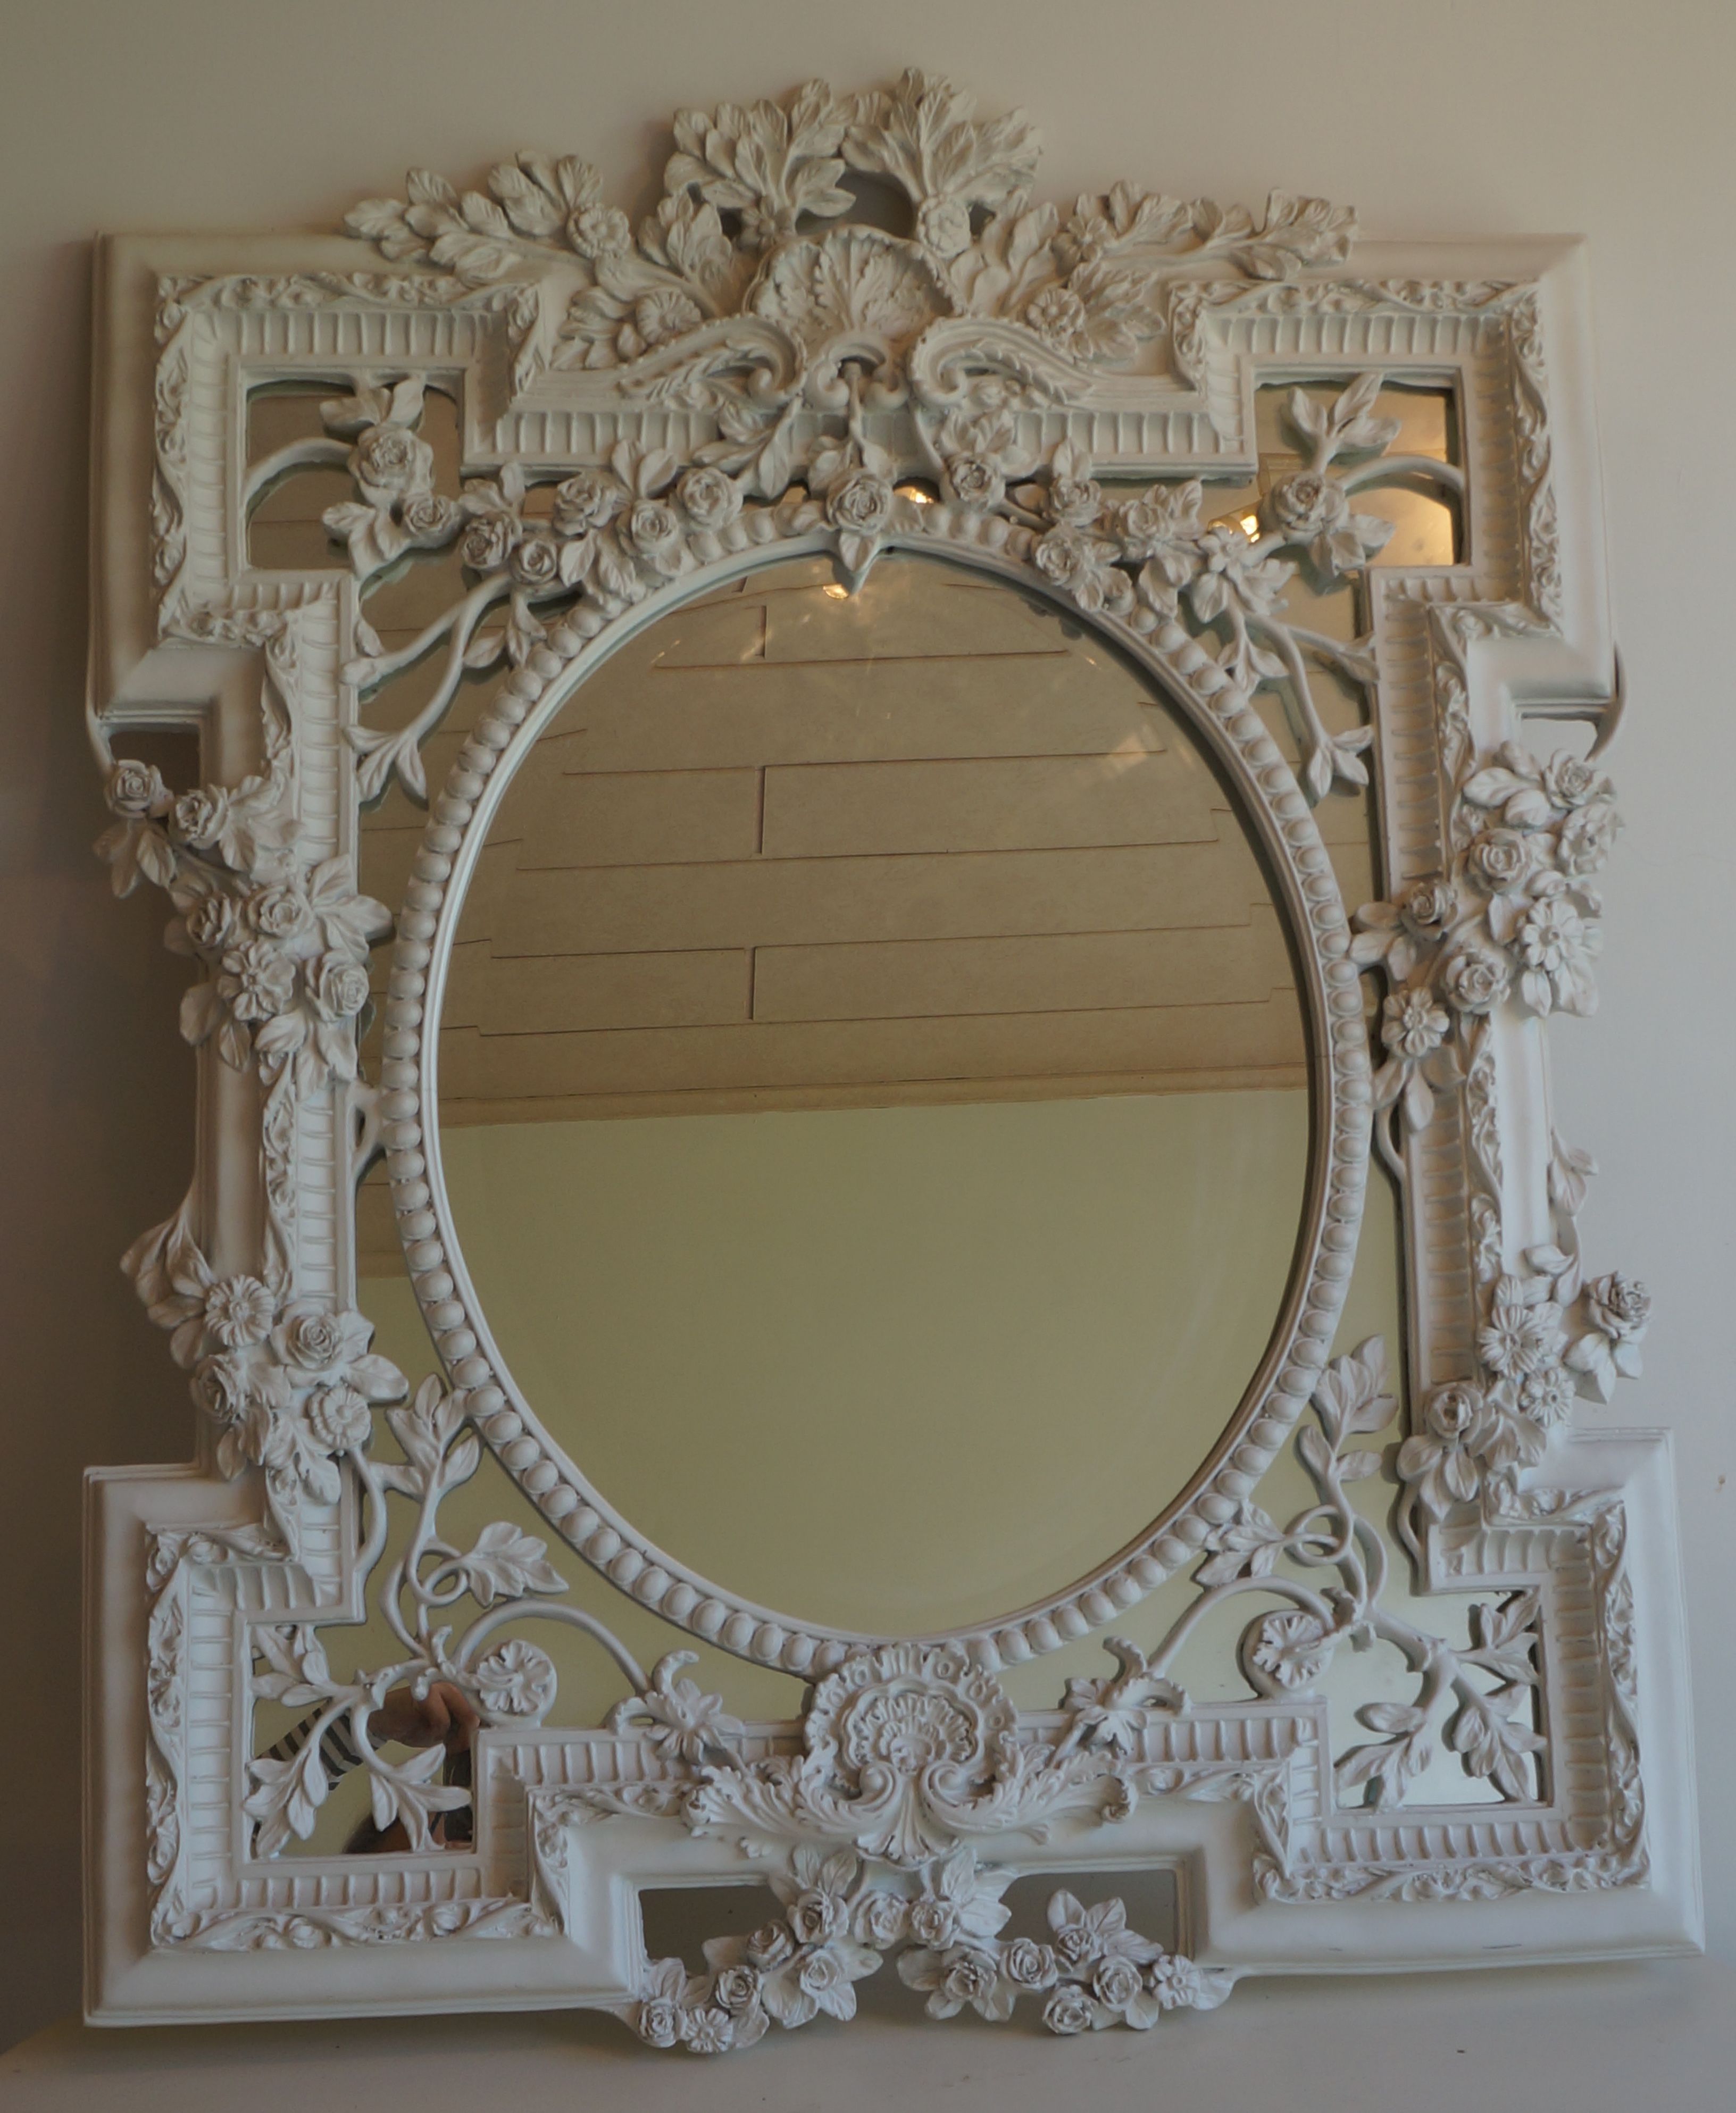 Well Known Decorative Large Wall Mirrors Regarding Shabbychic White Painted Ornate Relief Decorative Large Wall Mirror 